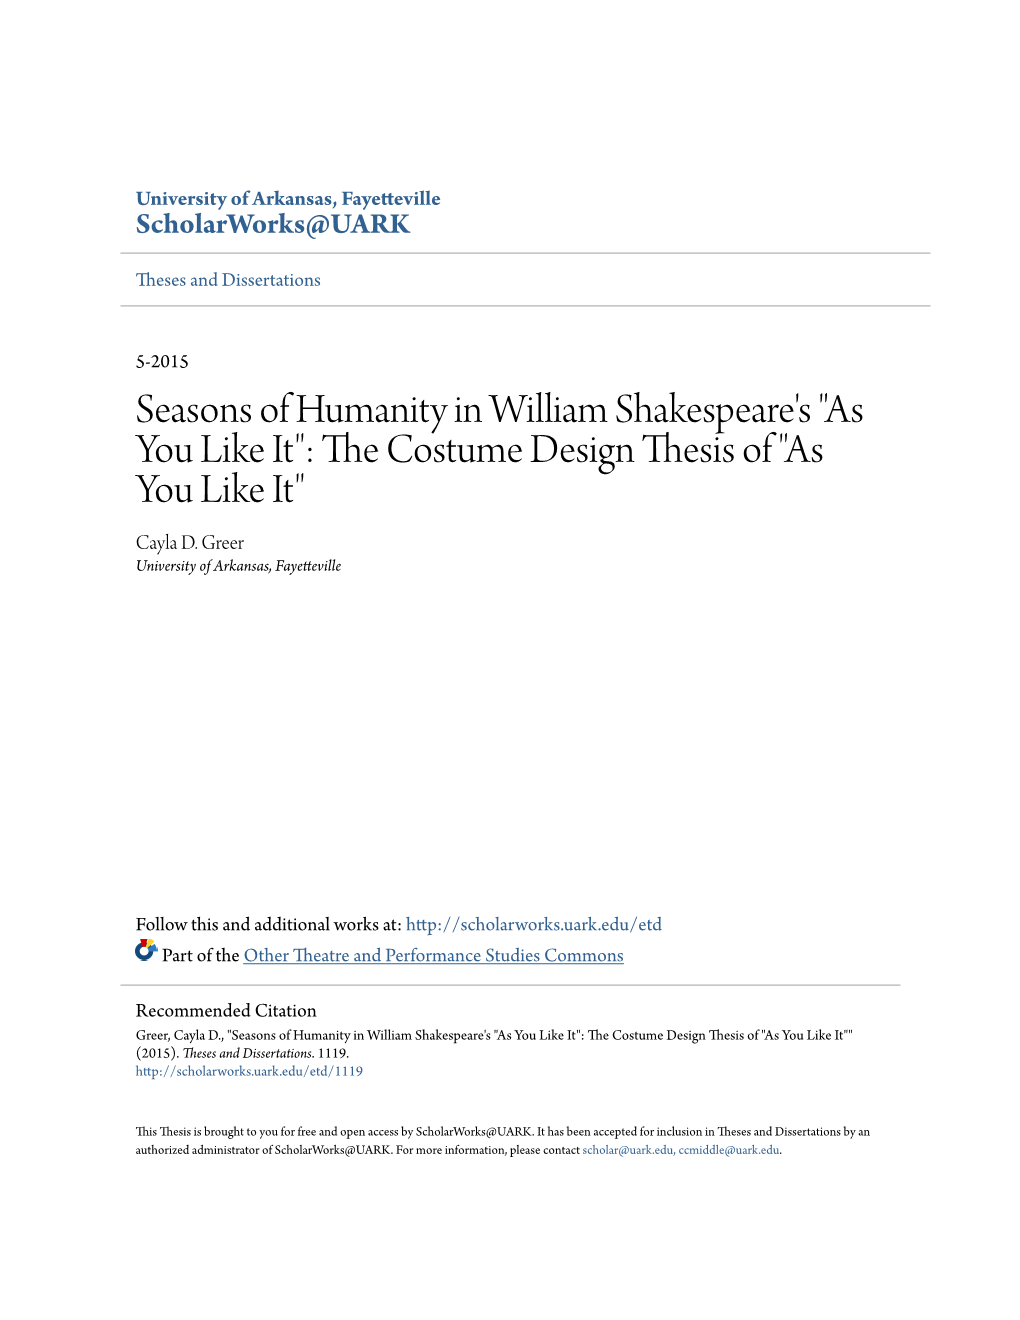 Seasons of Humanity in William Shakespeare's "As You Like It": the Oc Stume Design Thesis of "As You Like It" Cayla D